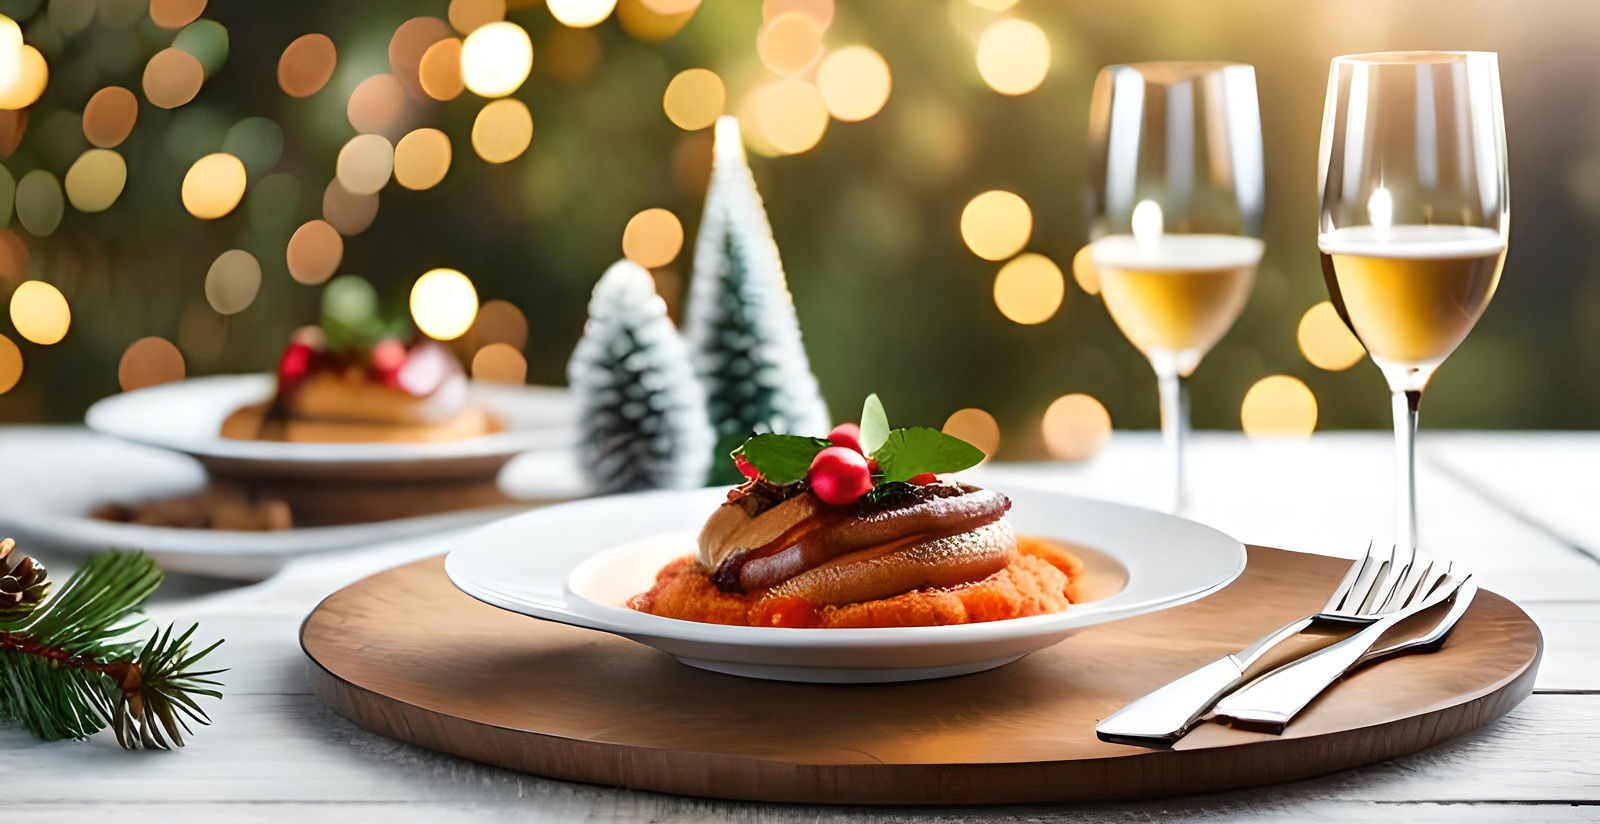 Grand Hotel Mediterraneo - The restaurants for Christmas Lunch in Florence at the Grand Hotel Mediterraneo 2